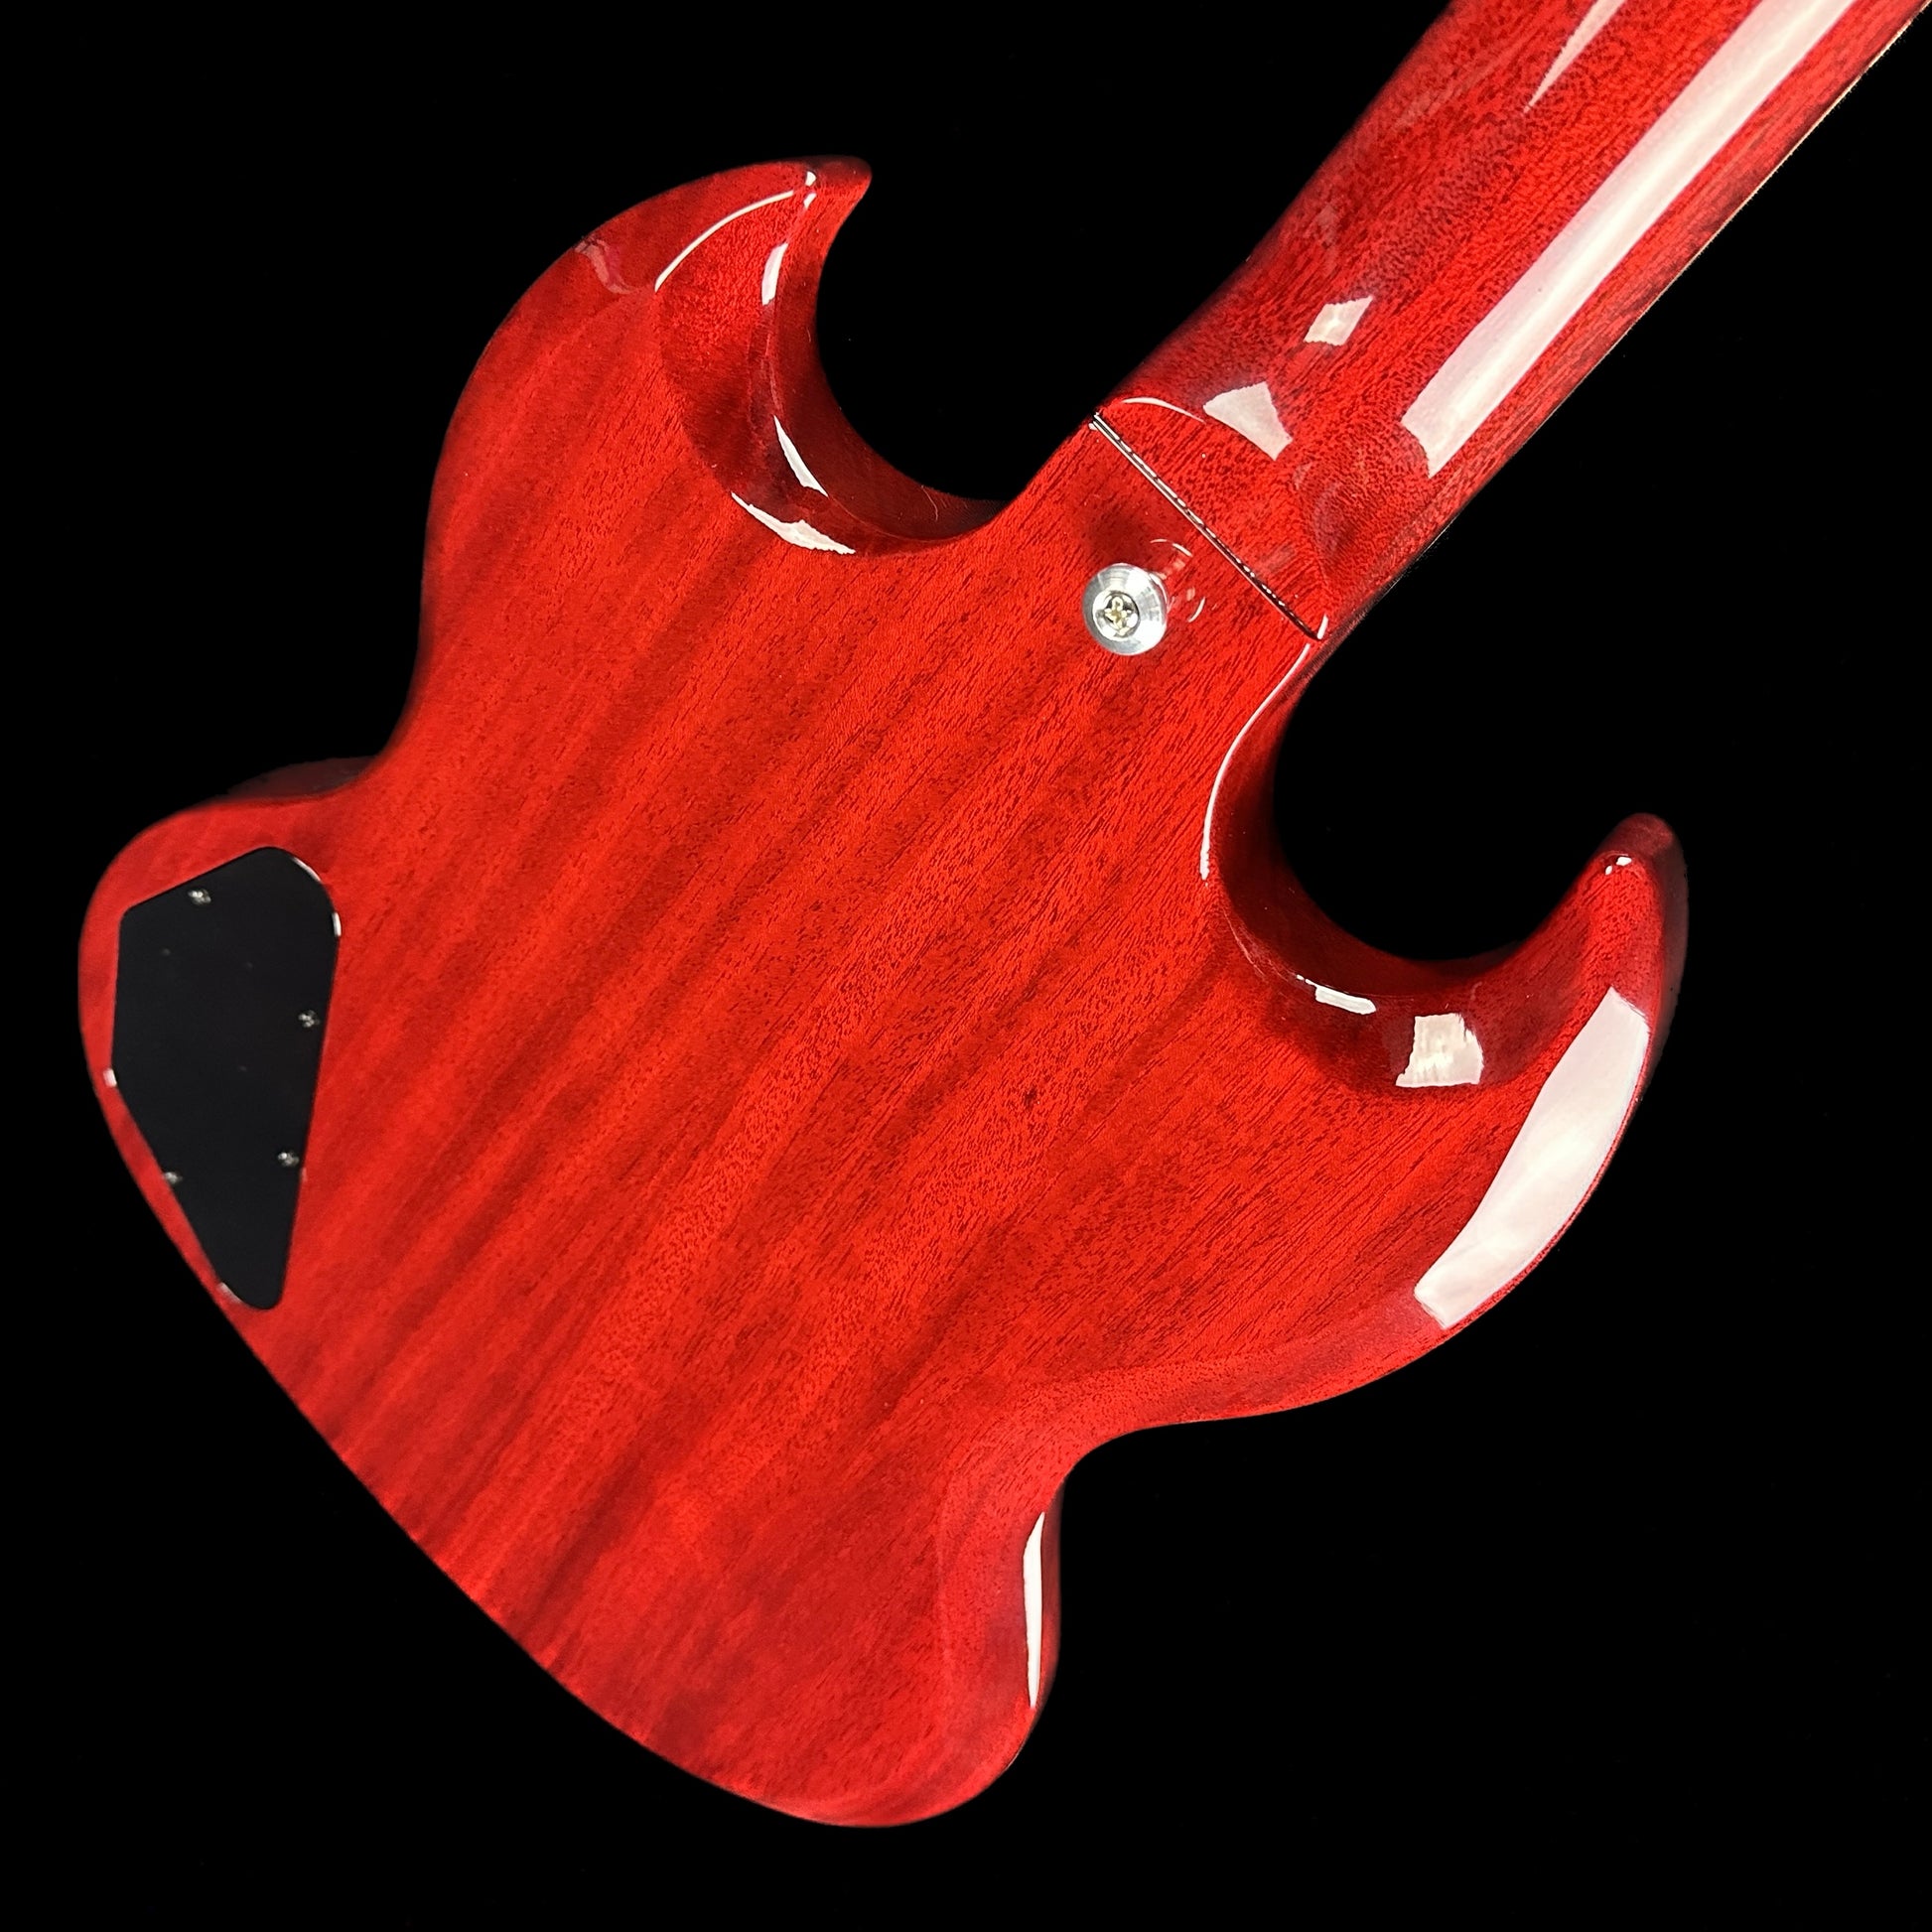 Back angle of Used Gibson SG Standard Cherry.